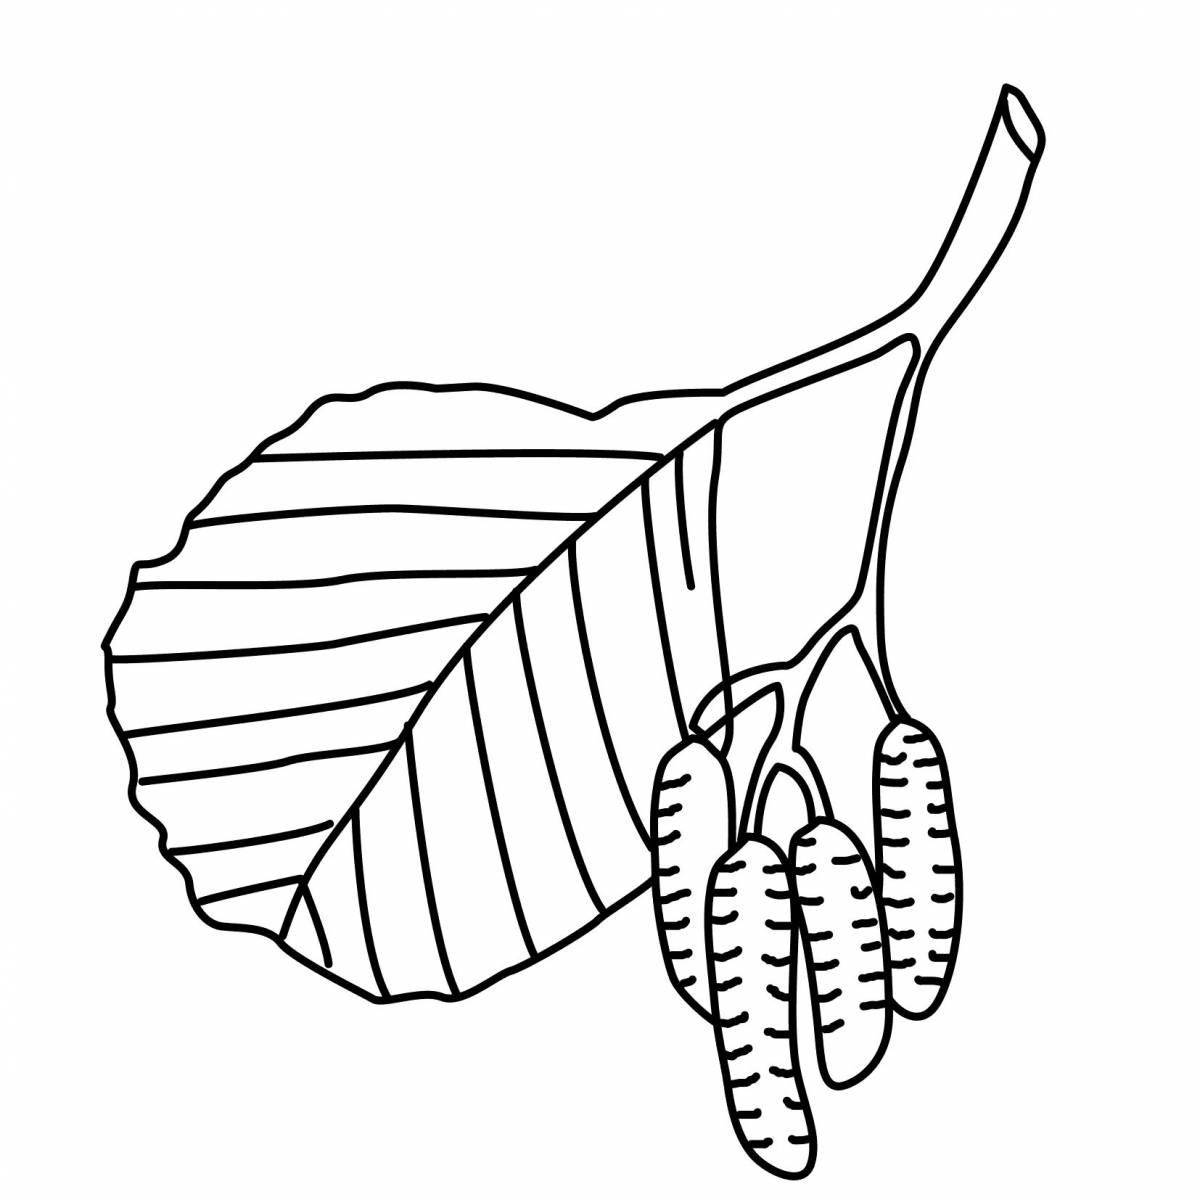 Blessed birch coloring page